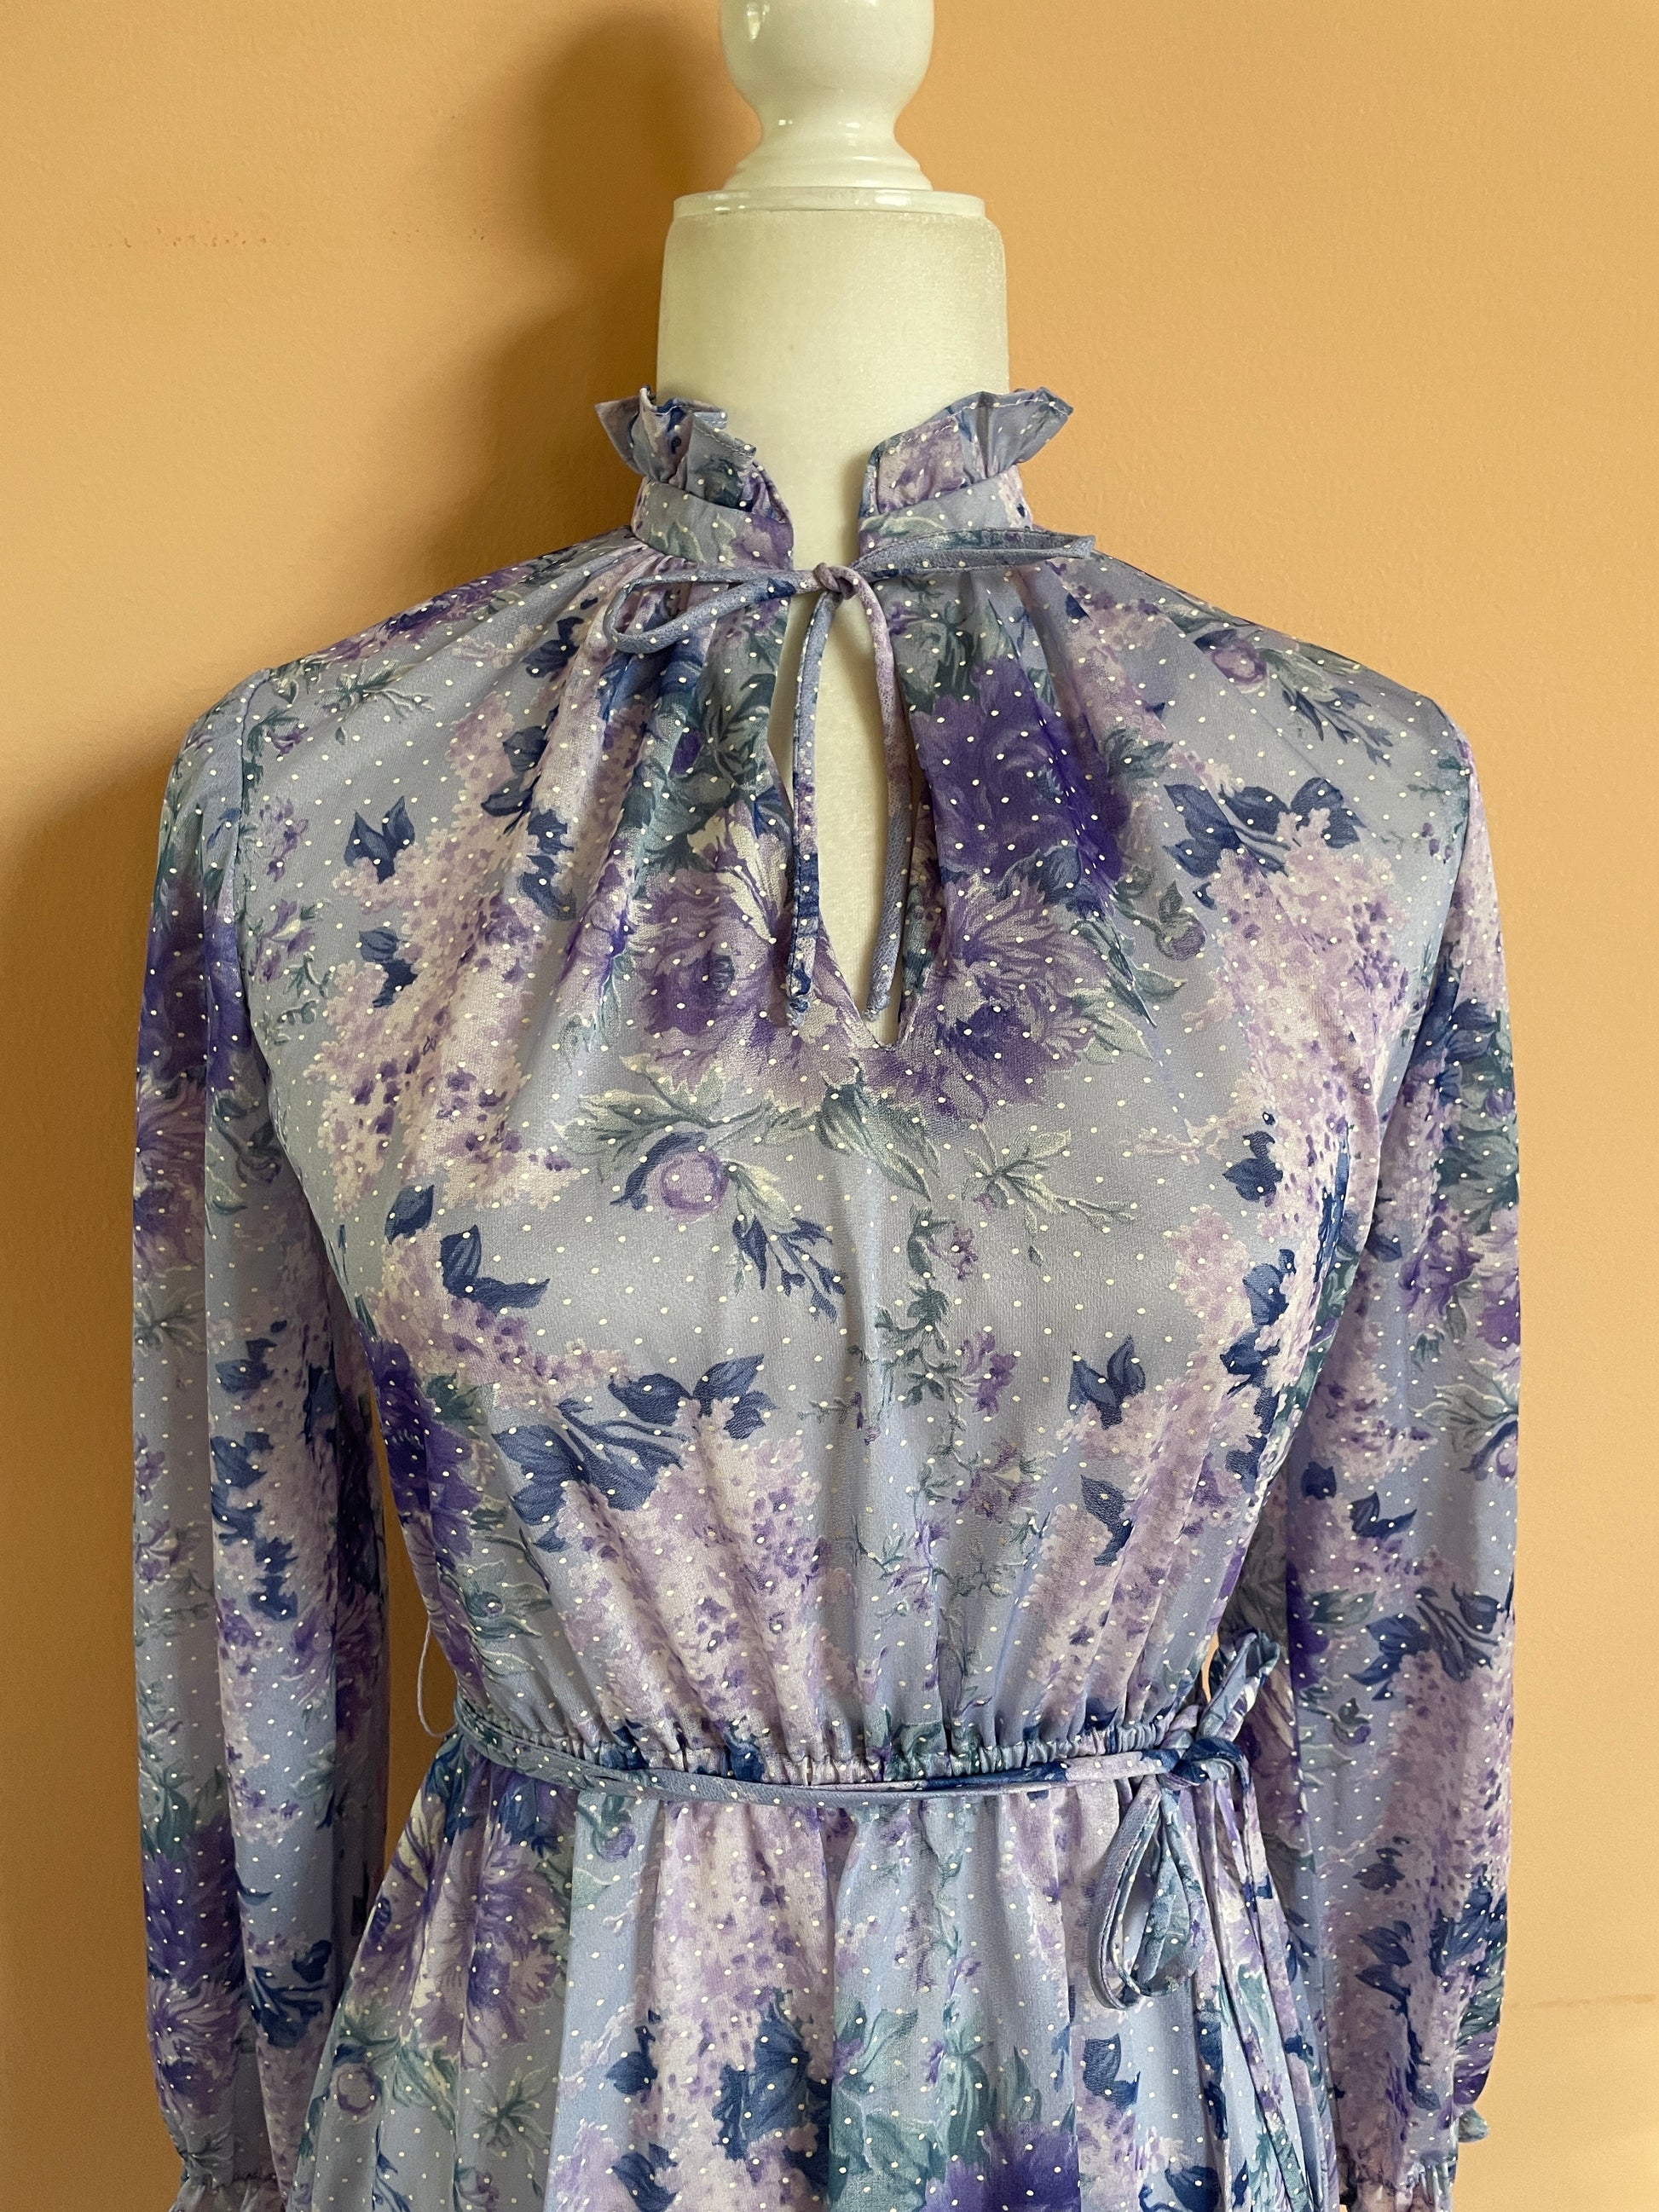  Lavender Fields 70s Purple Floral Poly Ruffled Vintage Dress S